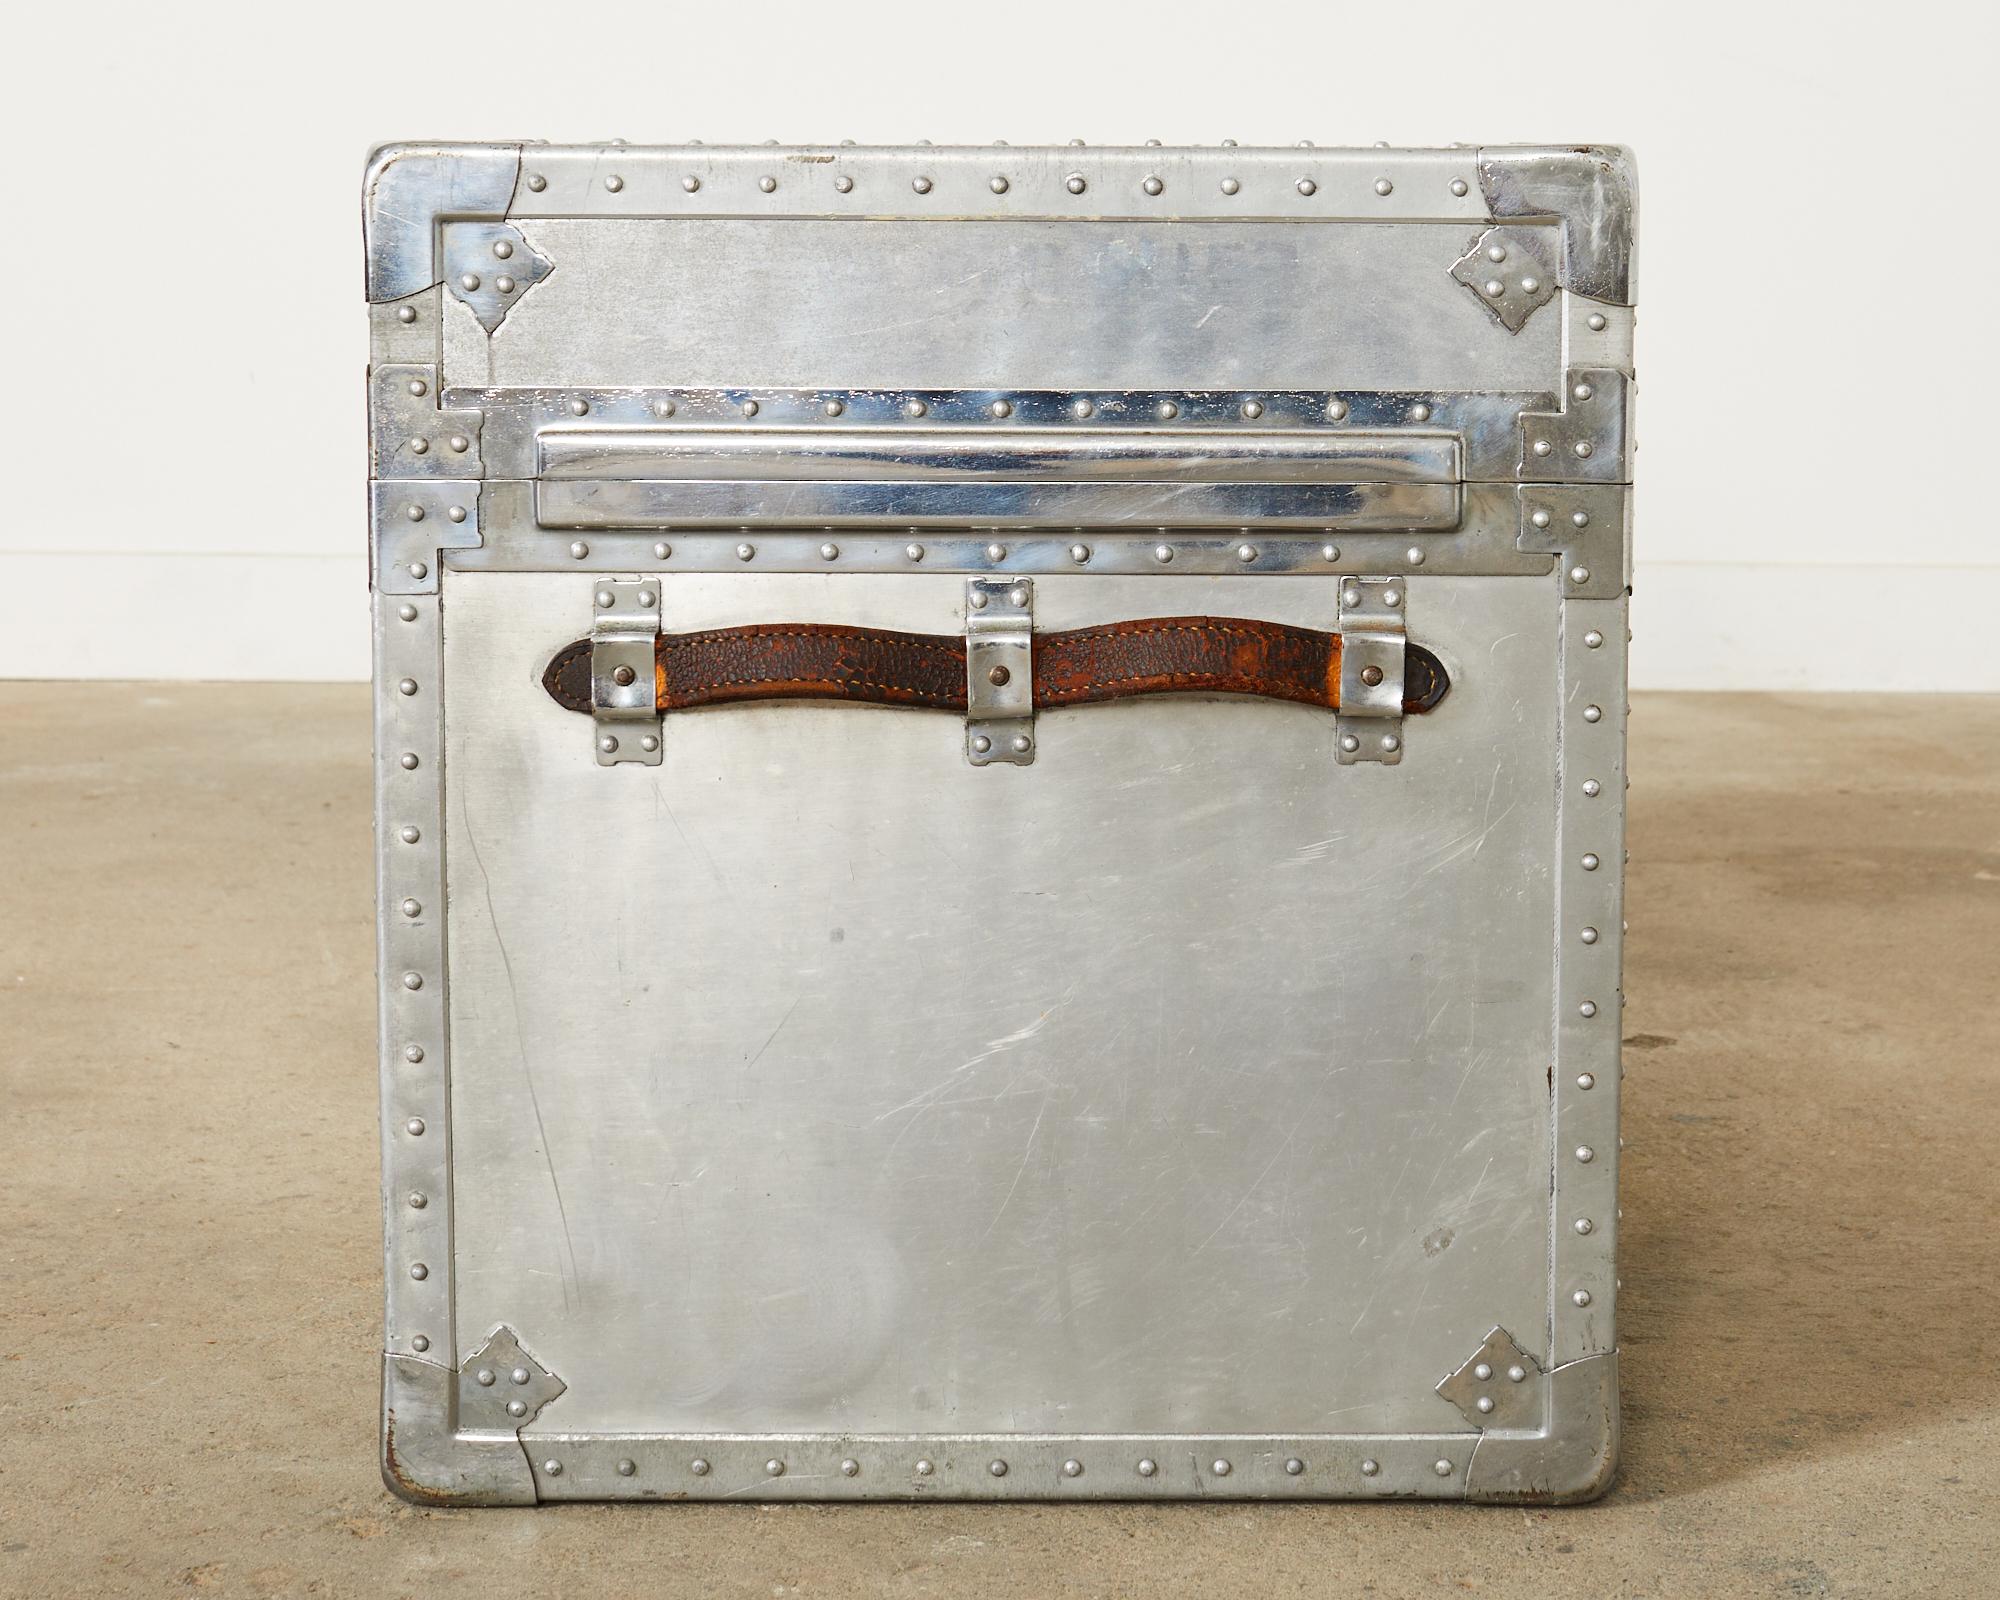 Midcentury Japanese Aluminum Steamer Travel Trunk by Kowa In Good Condition For Sale In Rio Vista, CA